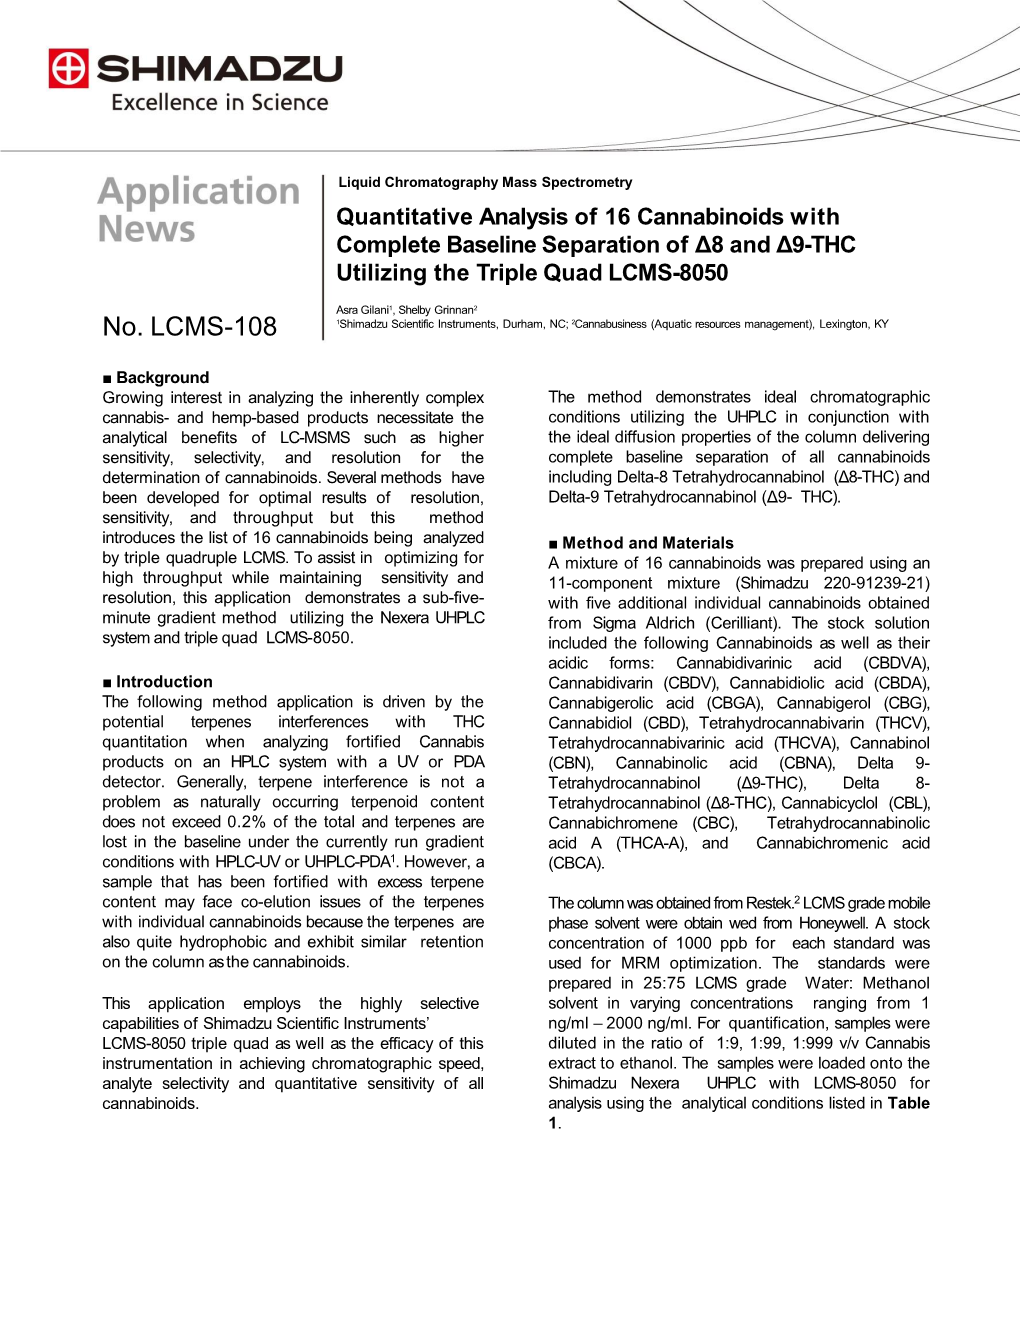 Quantitative Analysis of 16 Cannabinoids with Complete Baseline Separation of Δ8 and Δ9-THC Utilizing the Triple Quad LCMS-8050